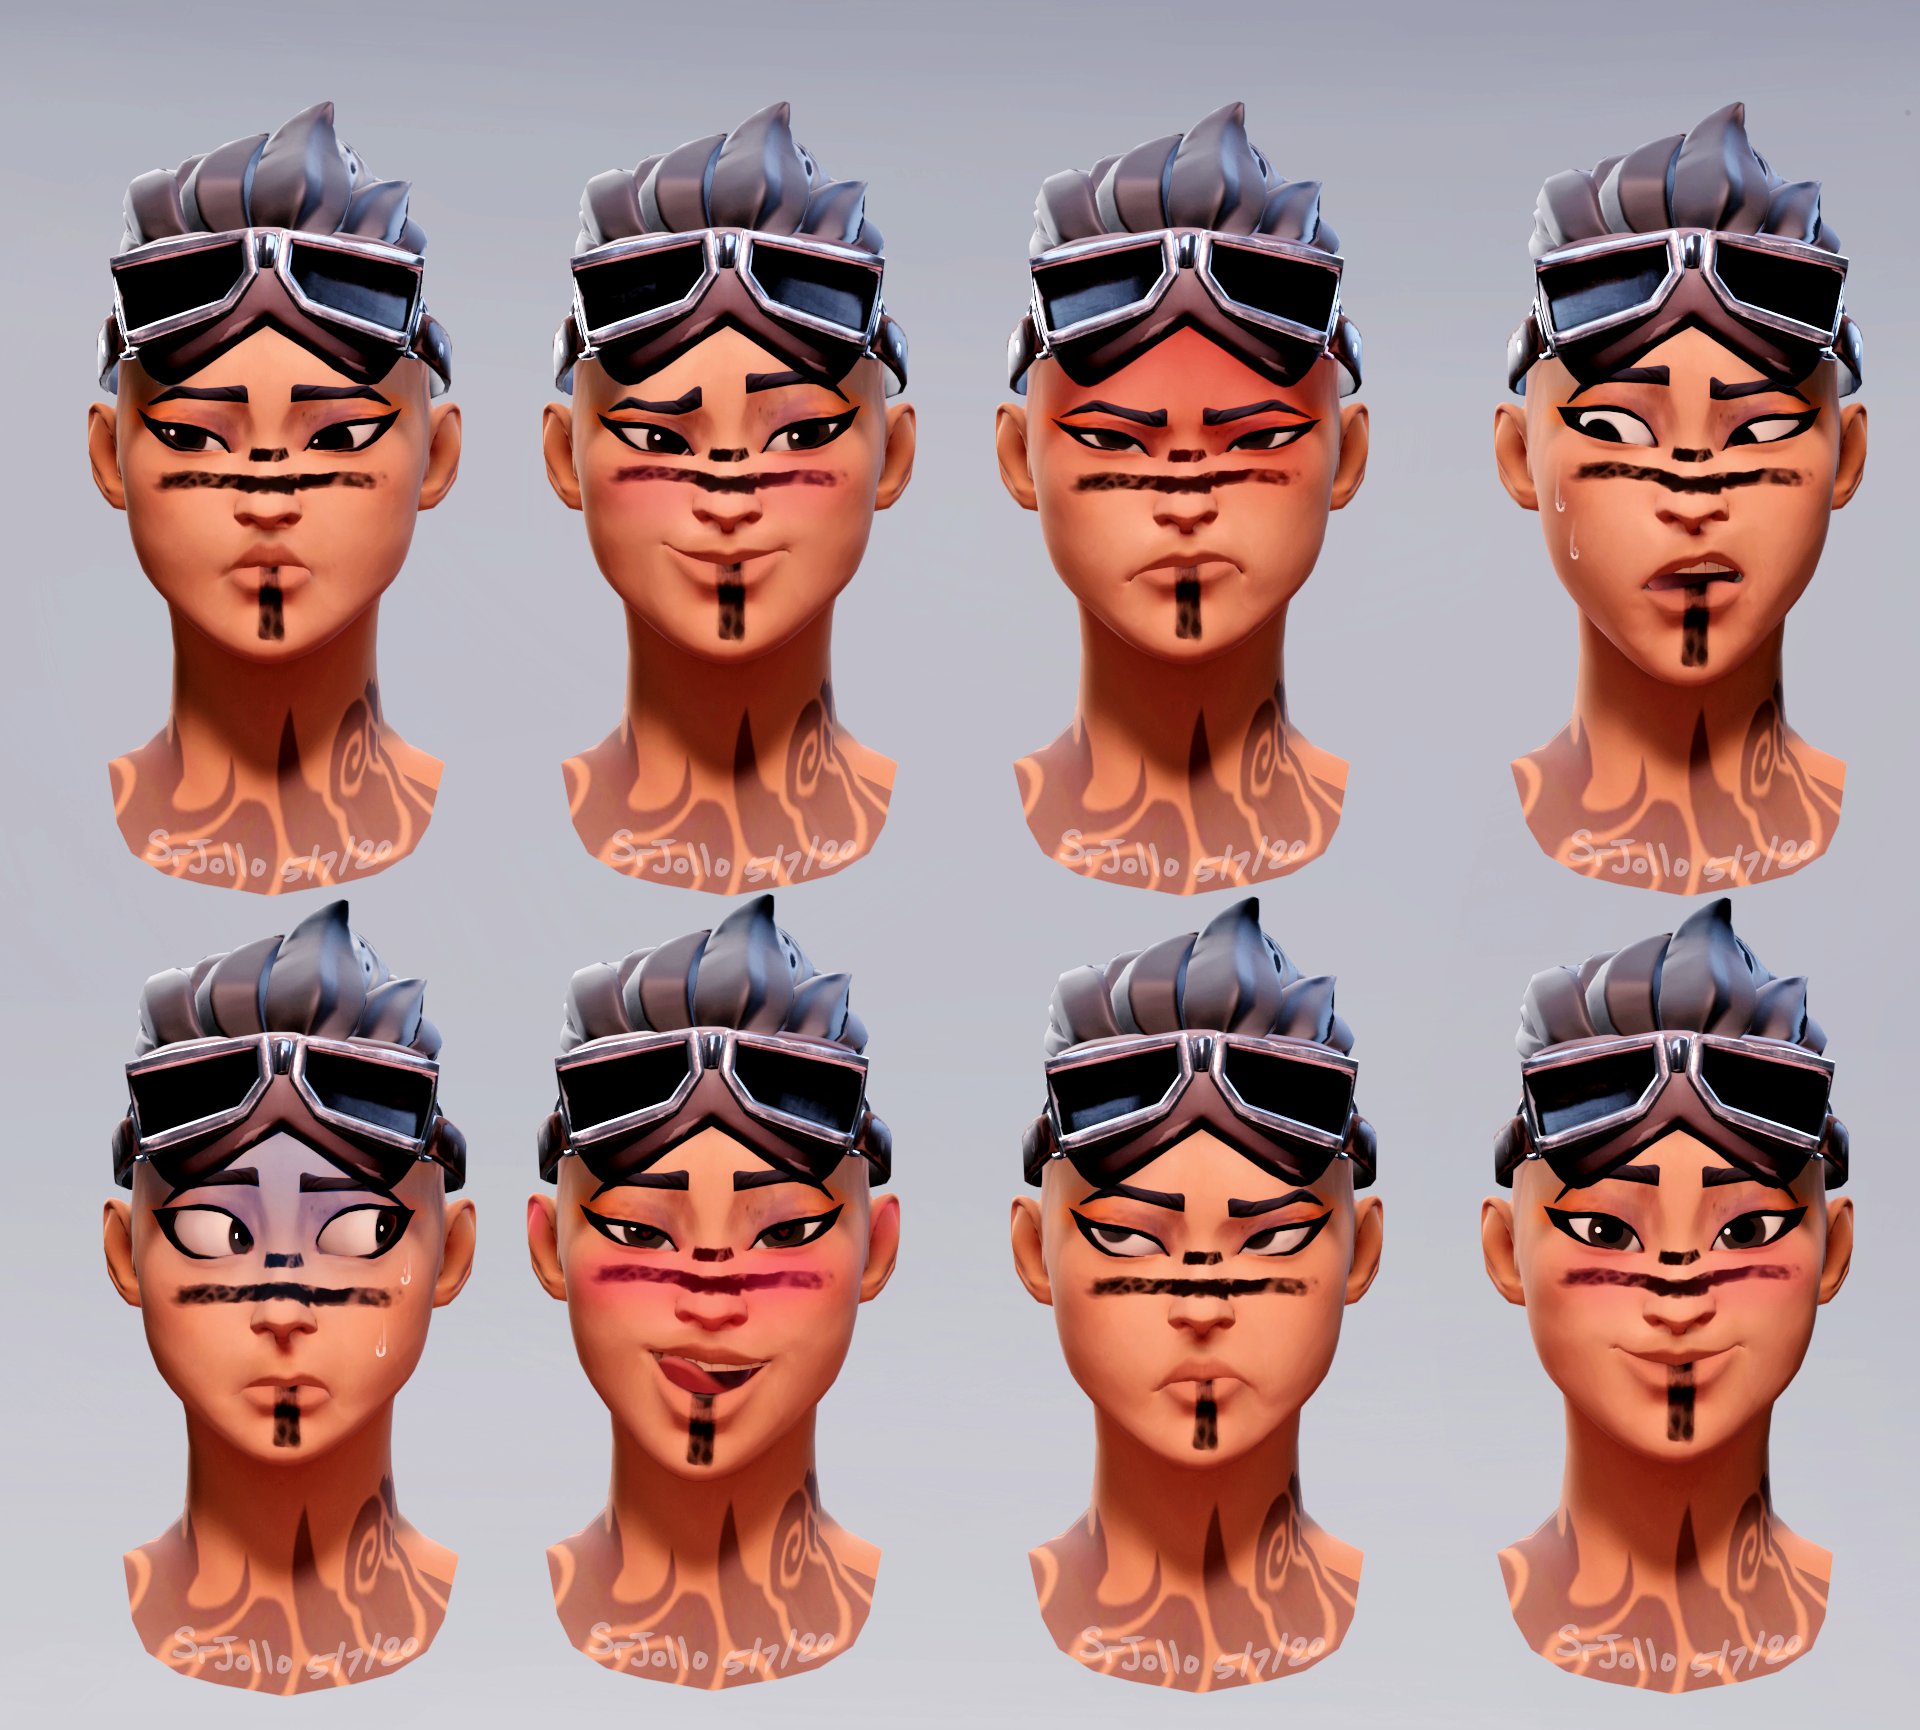 SrJollo on Twitter: "Blender Facial Expressions! https://t.co/13t6ZFyu17" Twitter